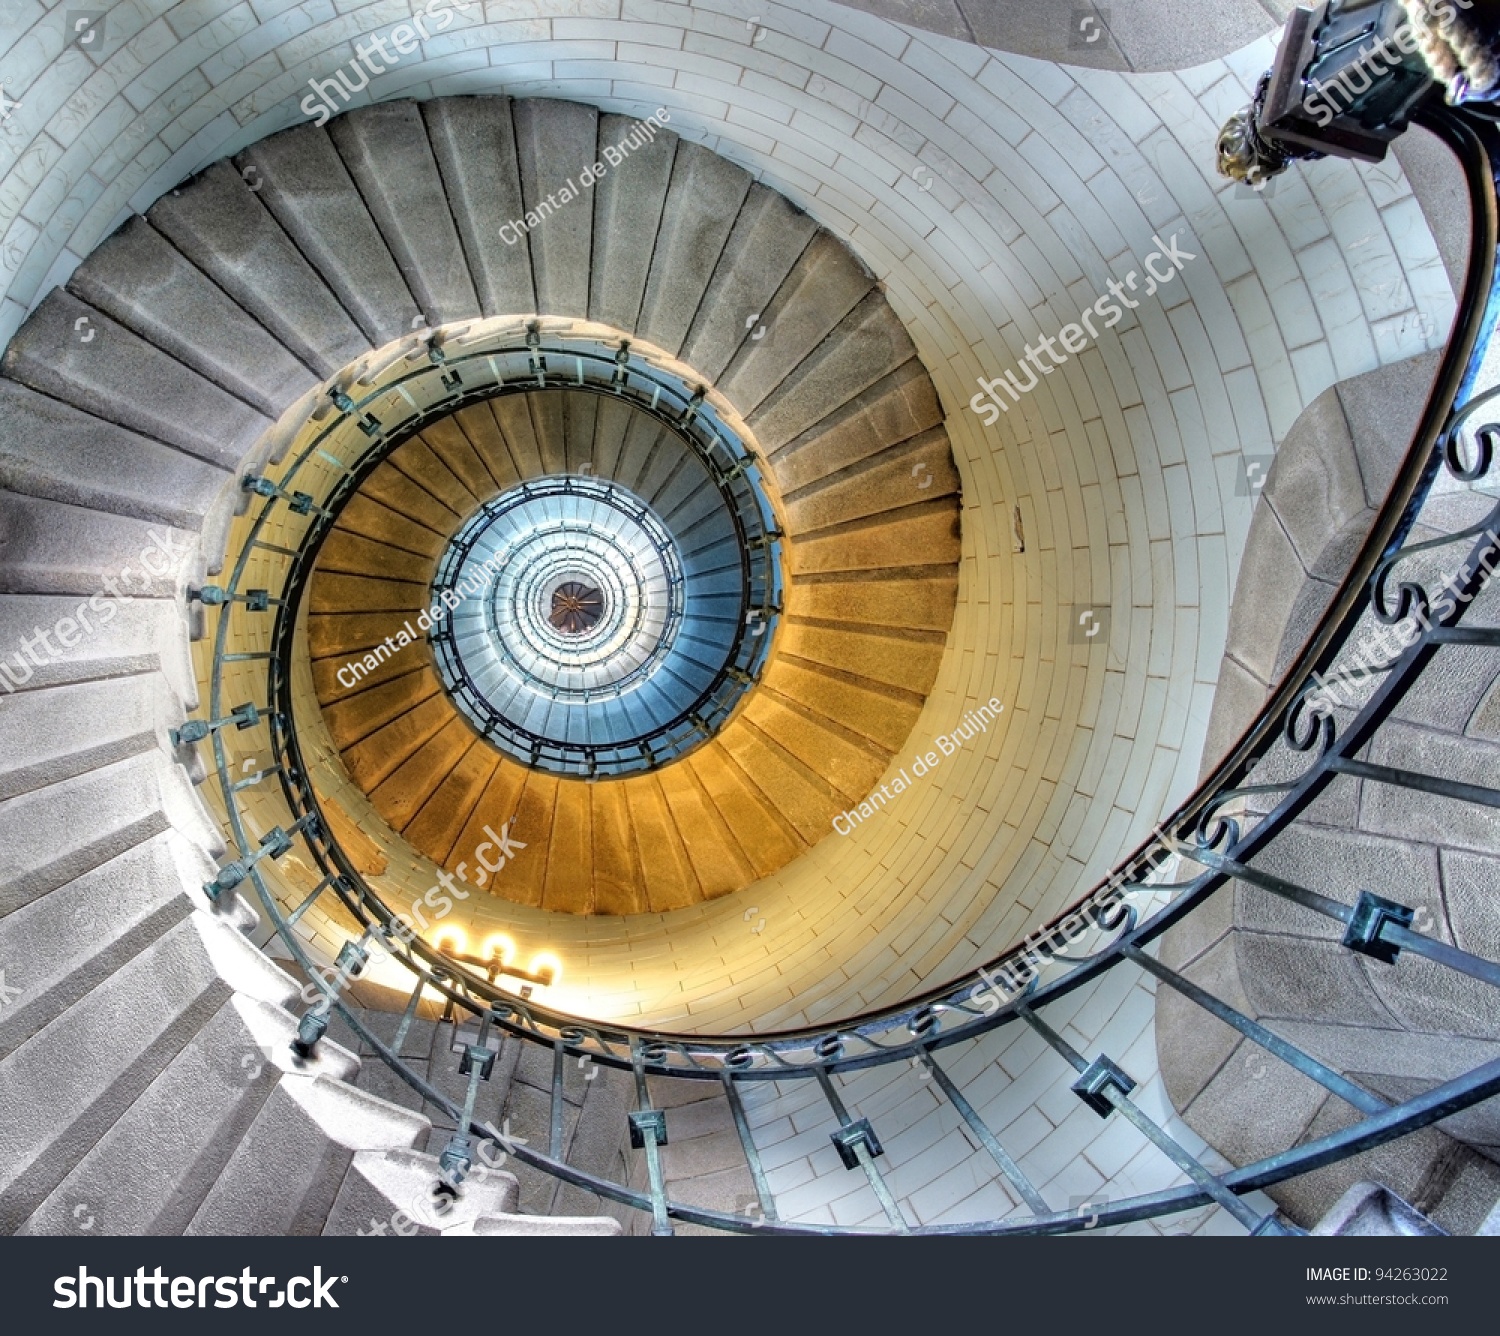 Upside view of a spiral staircase #94263022